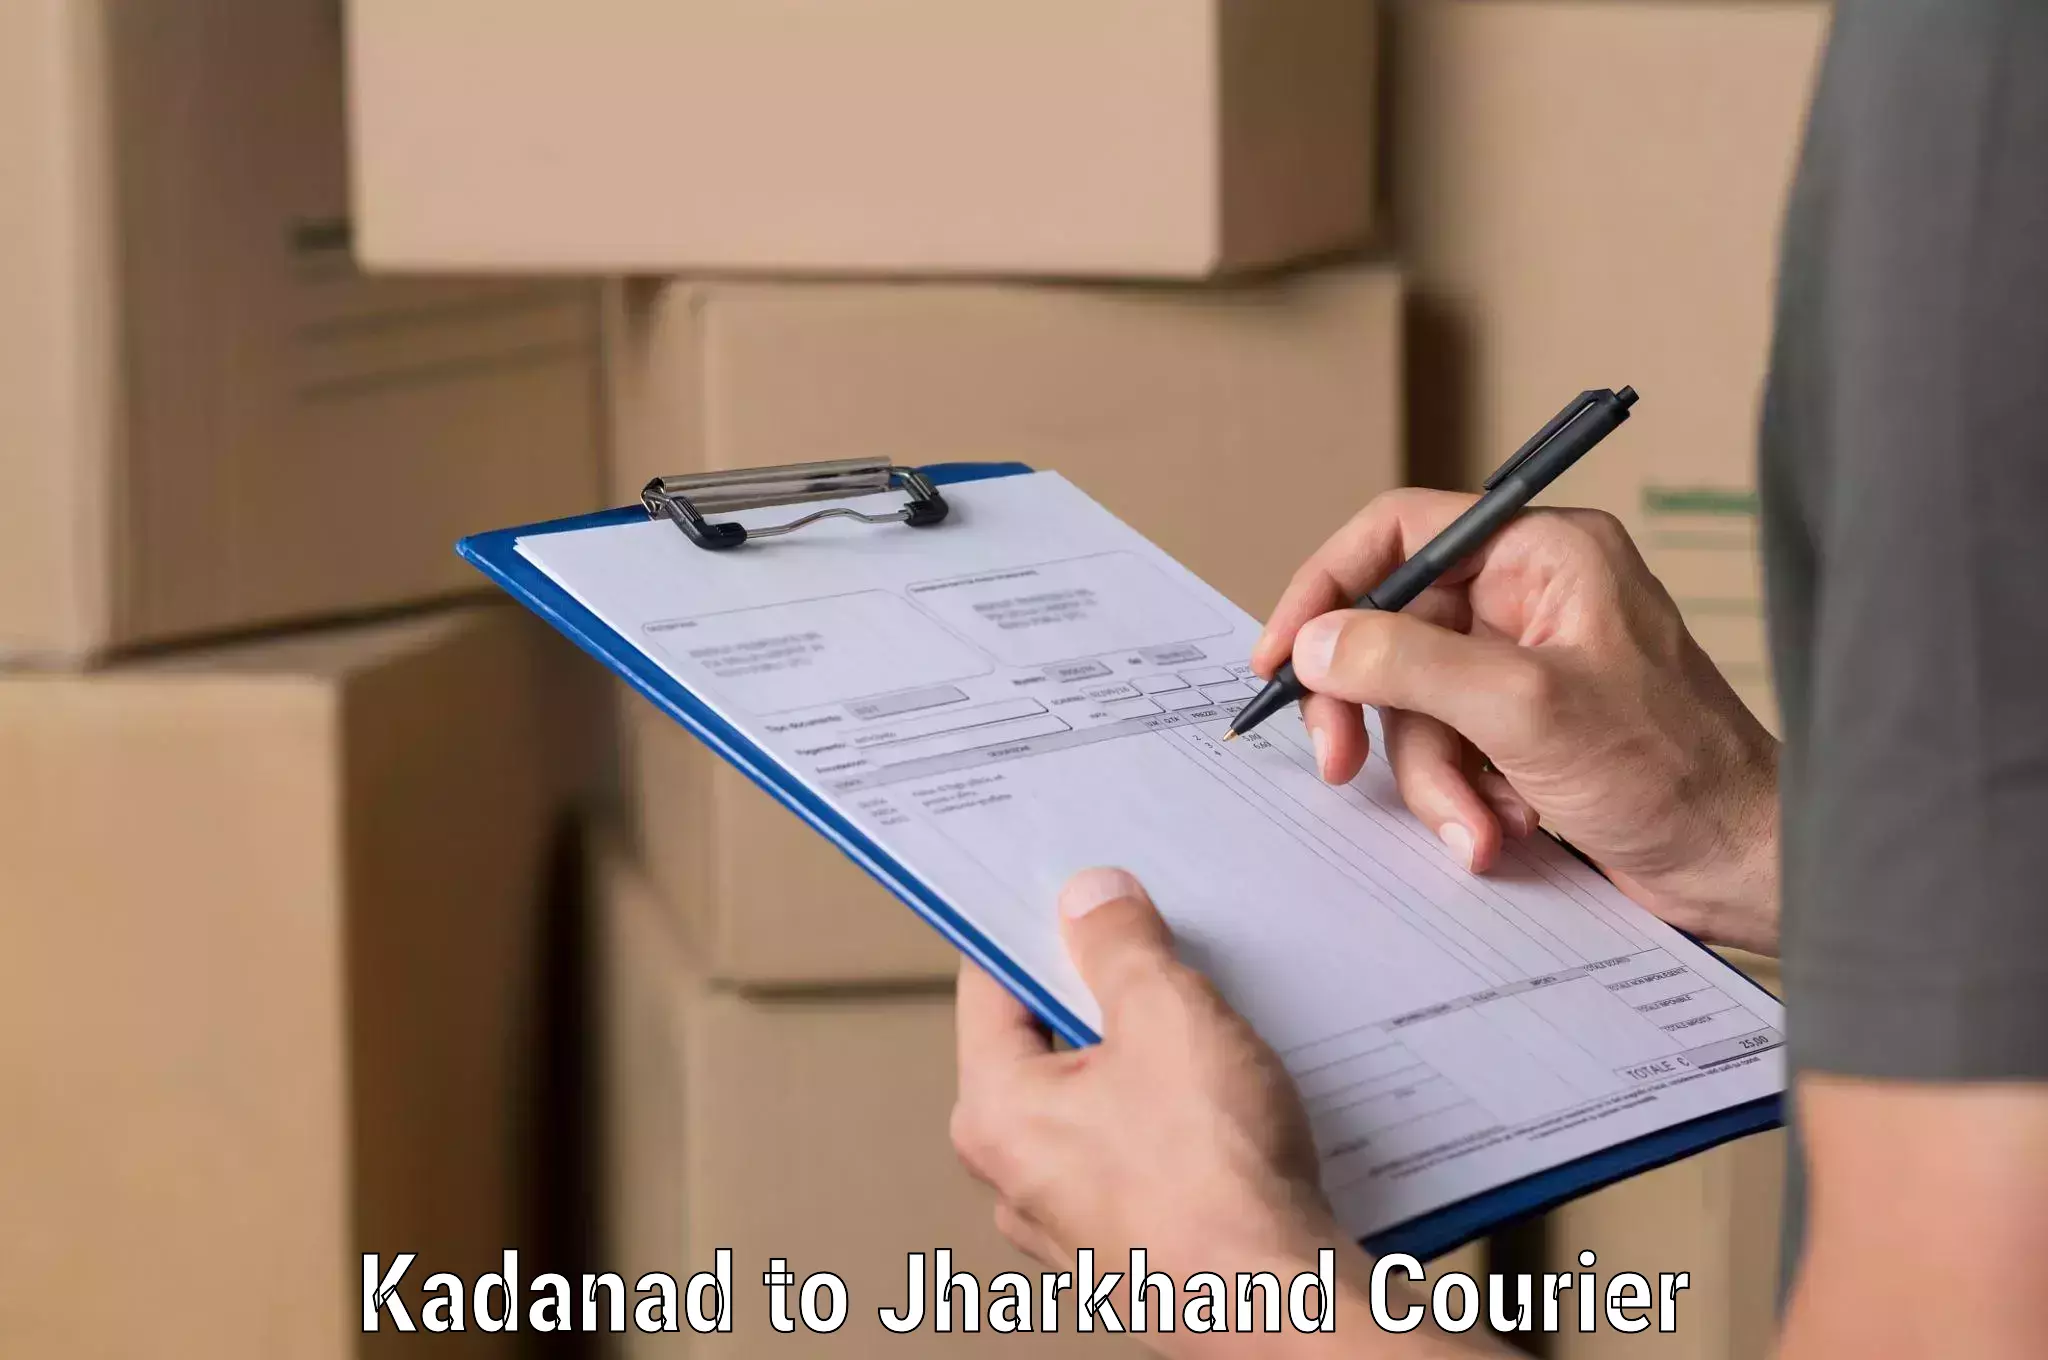 Small business couriers in Kadanad to Koderma